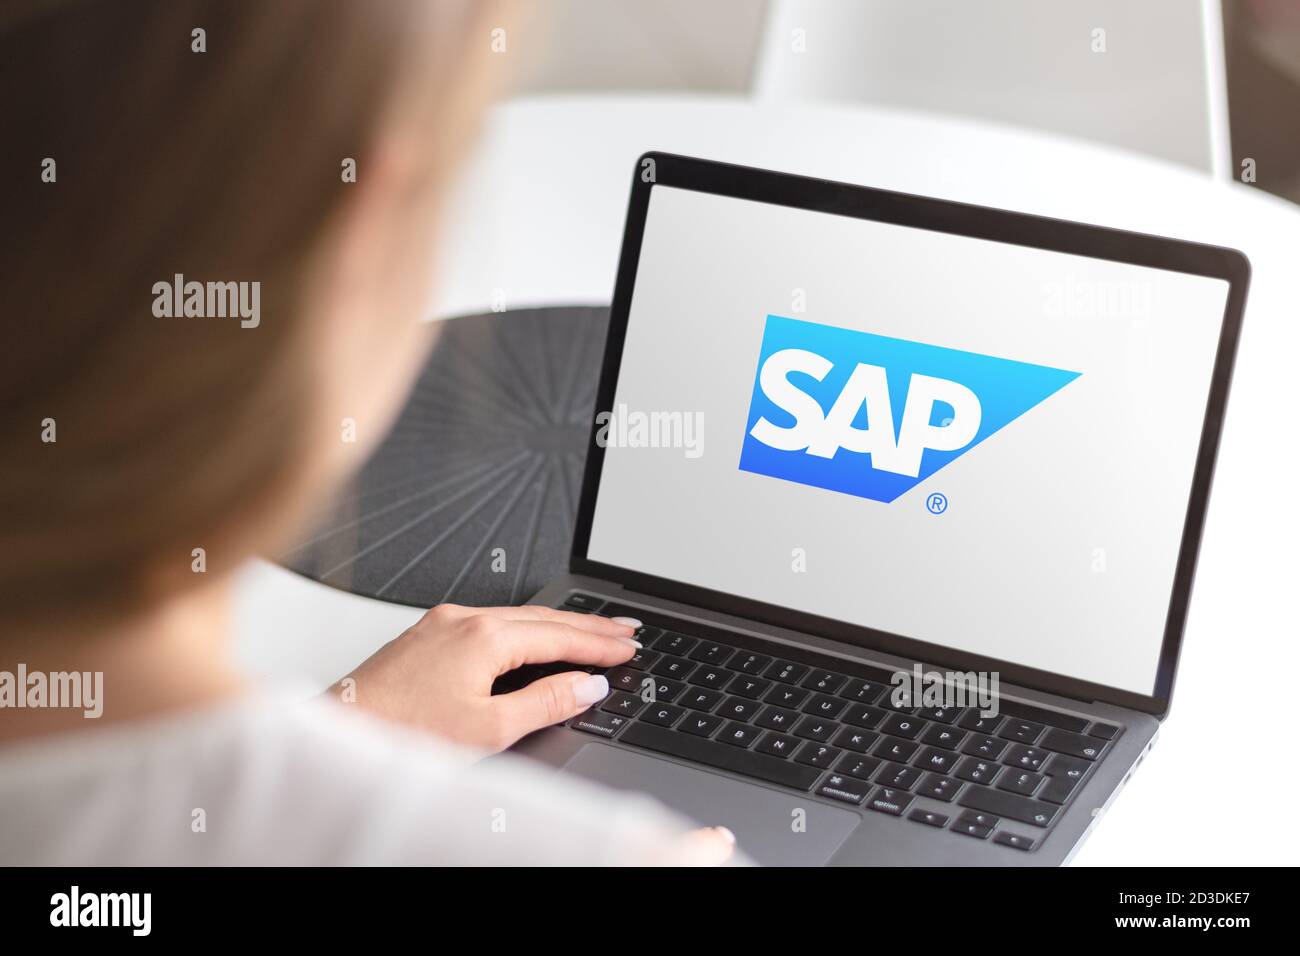 Guilherand-Granges, France - October 08, 2020. Smartphone with SAP logo. German multinational software cooperation. ERP and CRM software. Stock Photo